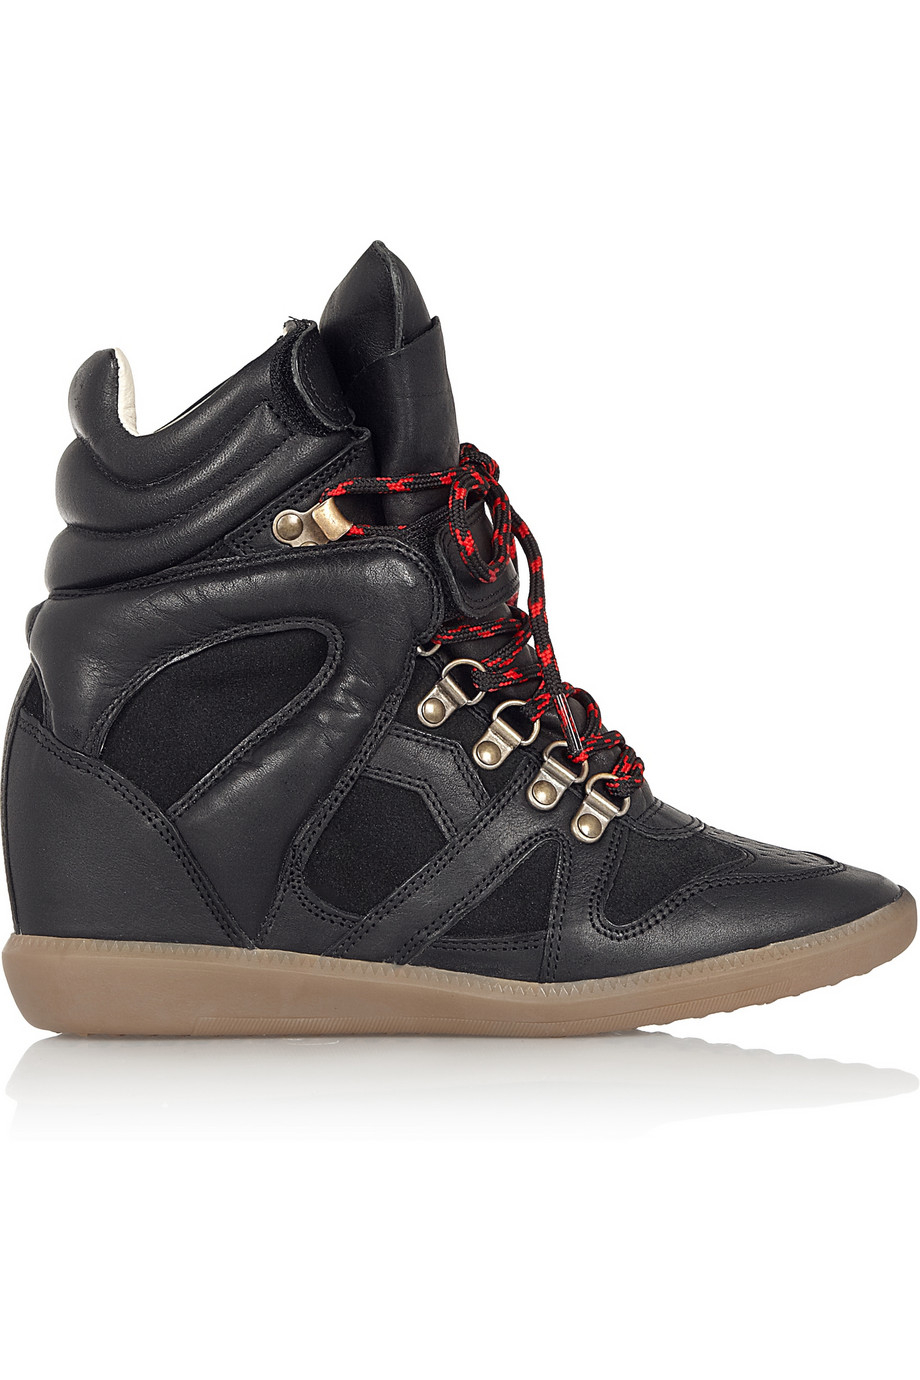 Isabel marant Étoile Buck Leather And Suede Wedge Sneakers ...